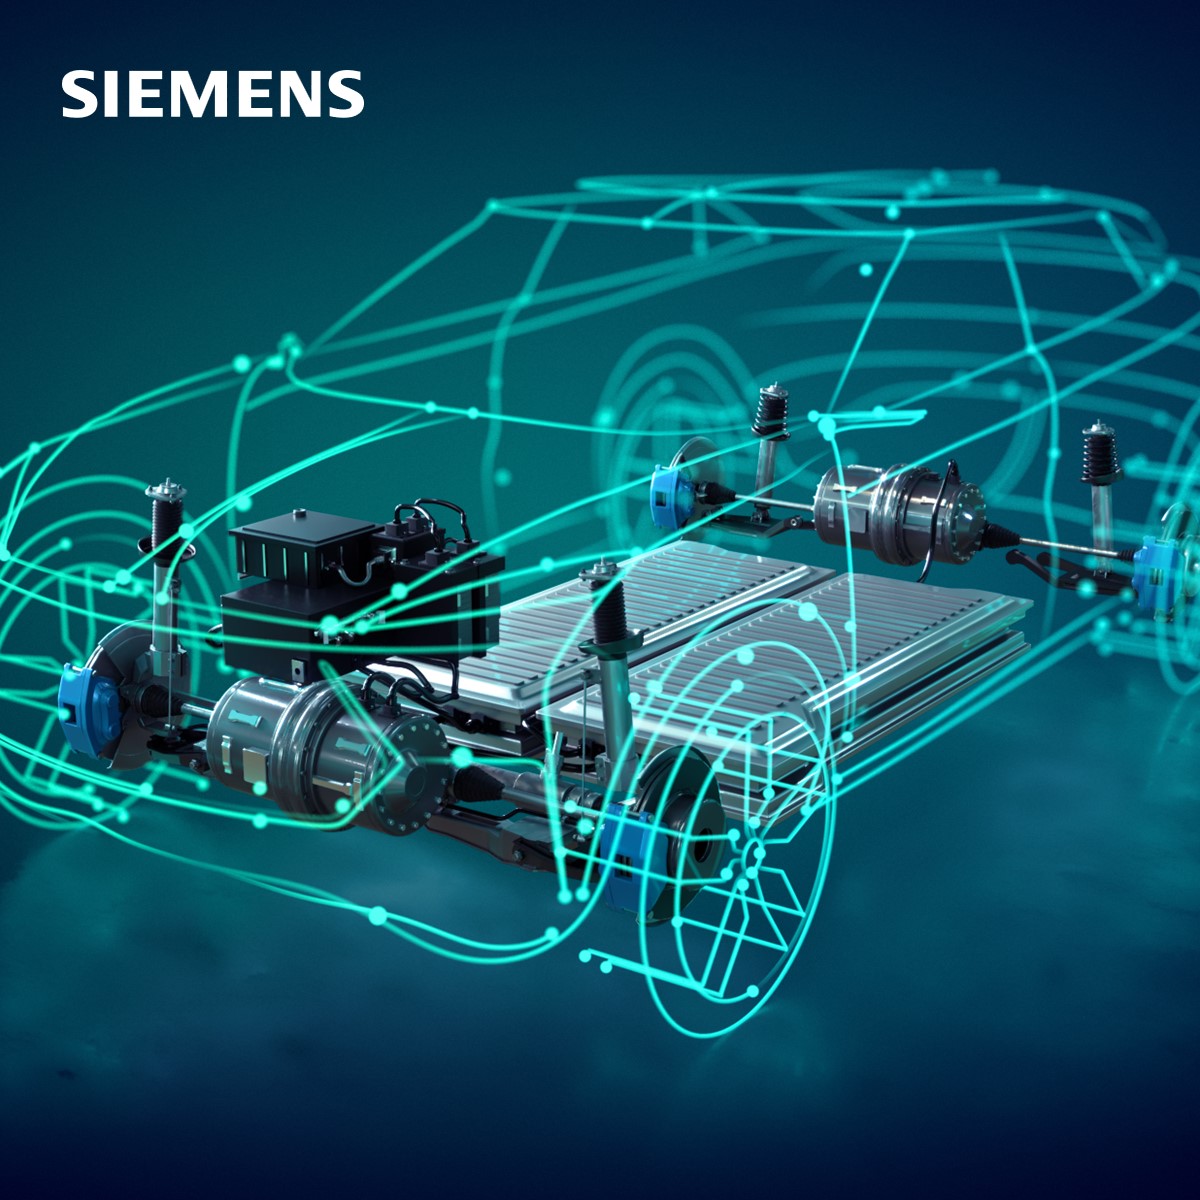 Our cities are changing, and so are our cars. But how do we design safe and reliable autonomous vehicles (AVs)? Explore the complexities of AV development, from sensor fusion to managing diverse data. Learn more about the future of mobility: sie.ag/32tnnc